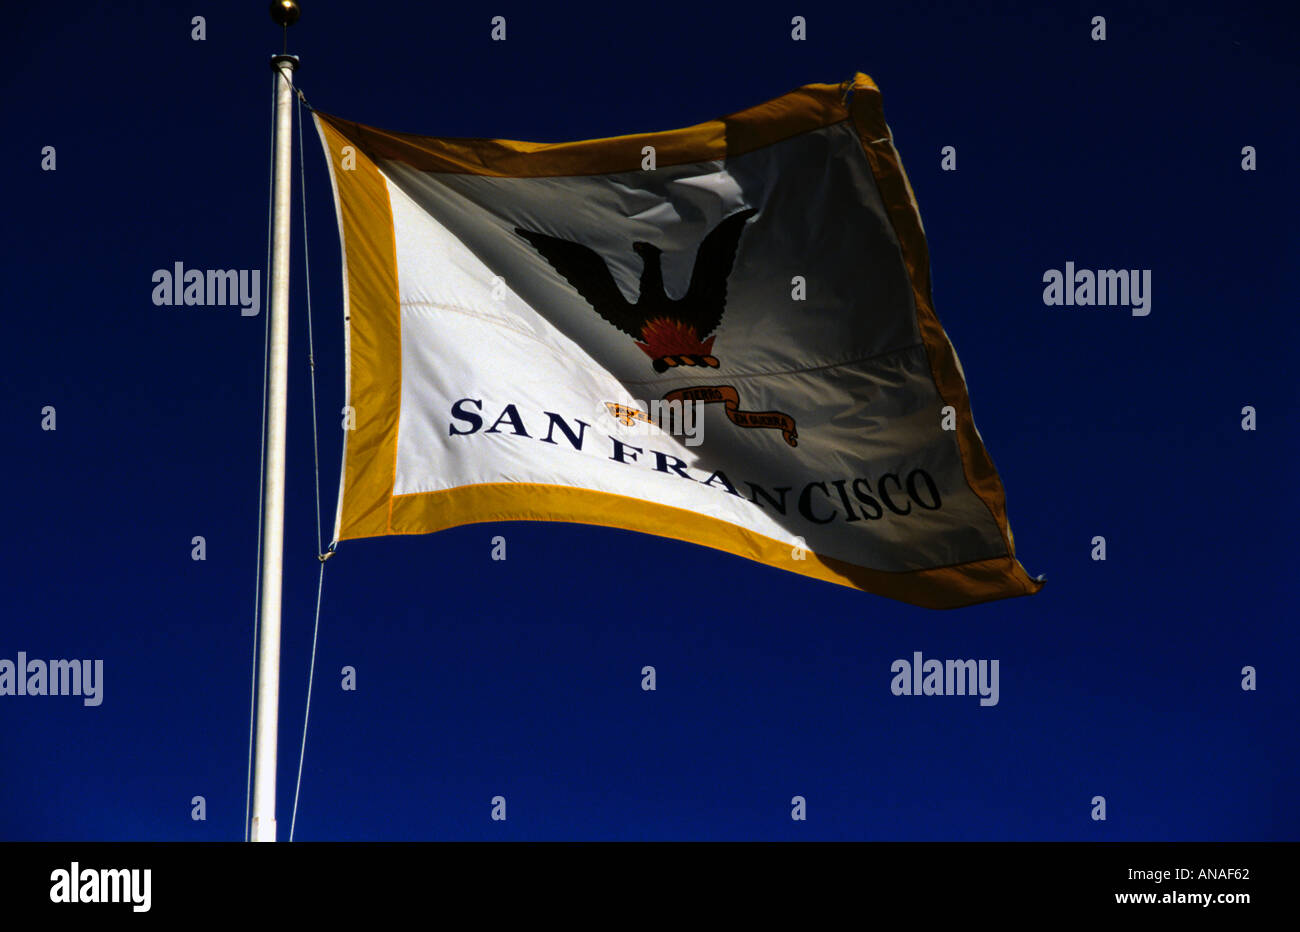 The California State Flag flying in San Francisco, USA Stock Photo